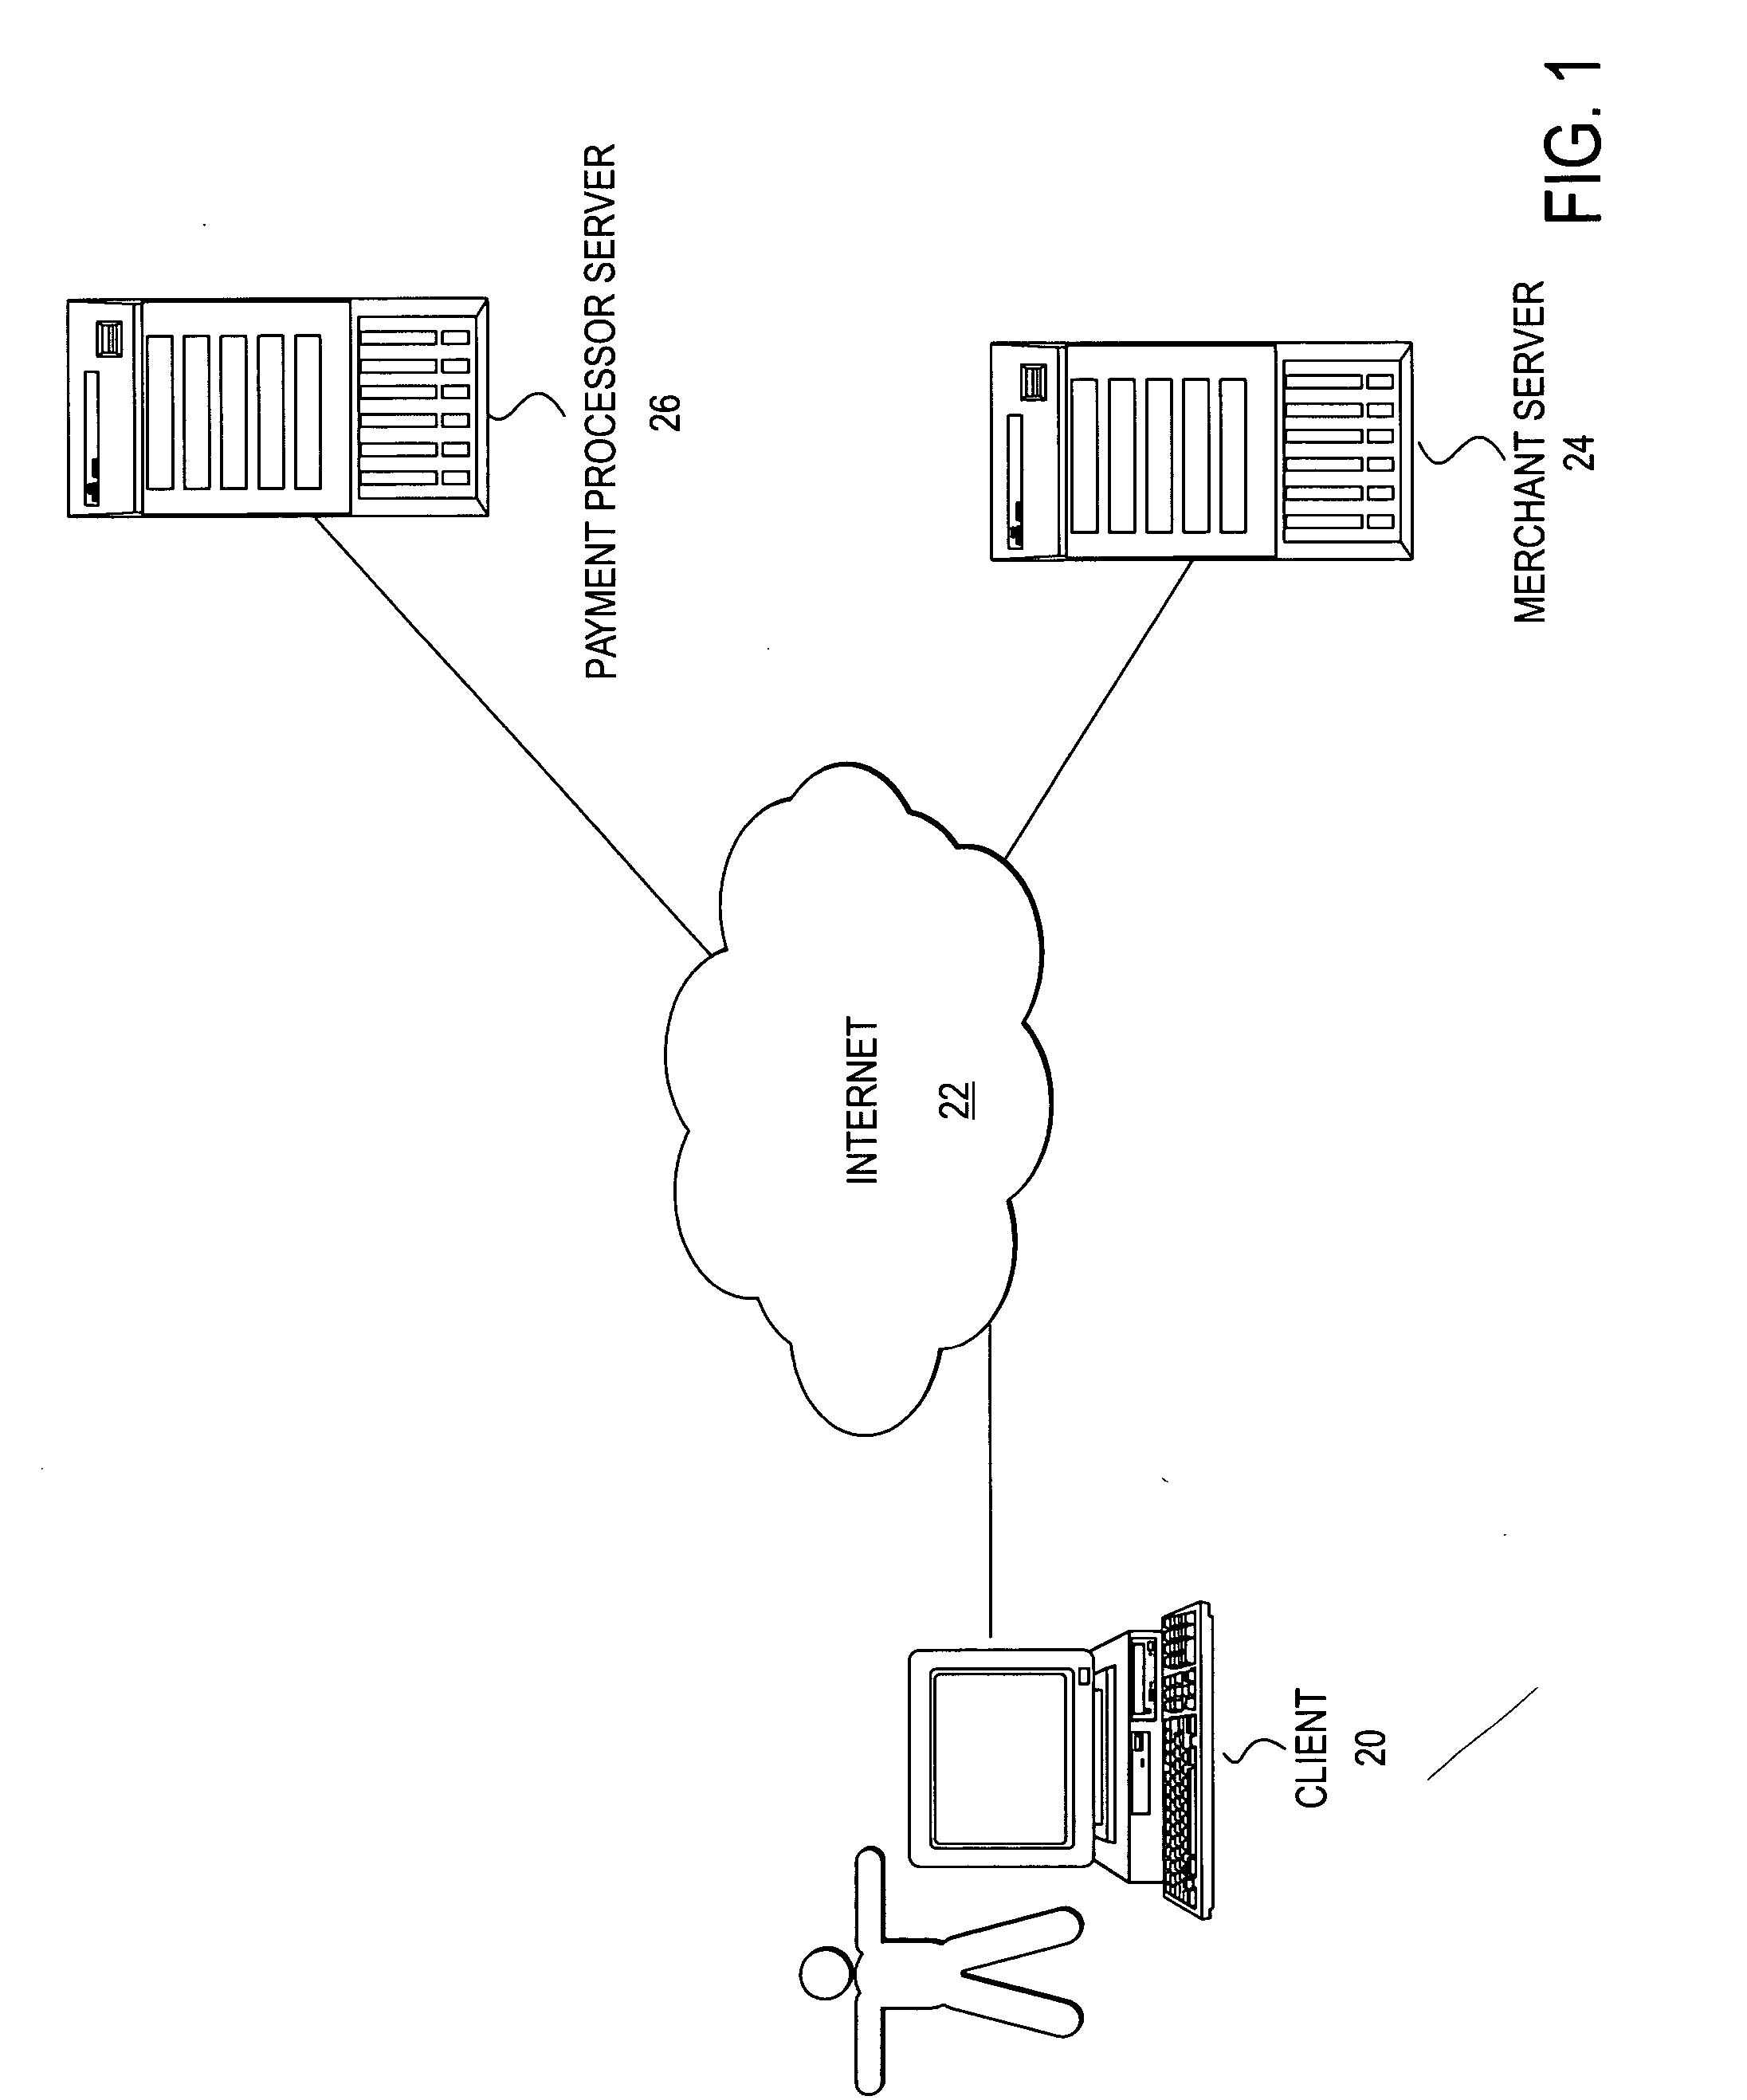 Method and system to facilitate securely processing a payment for an online transaction